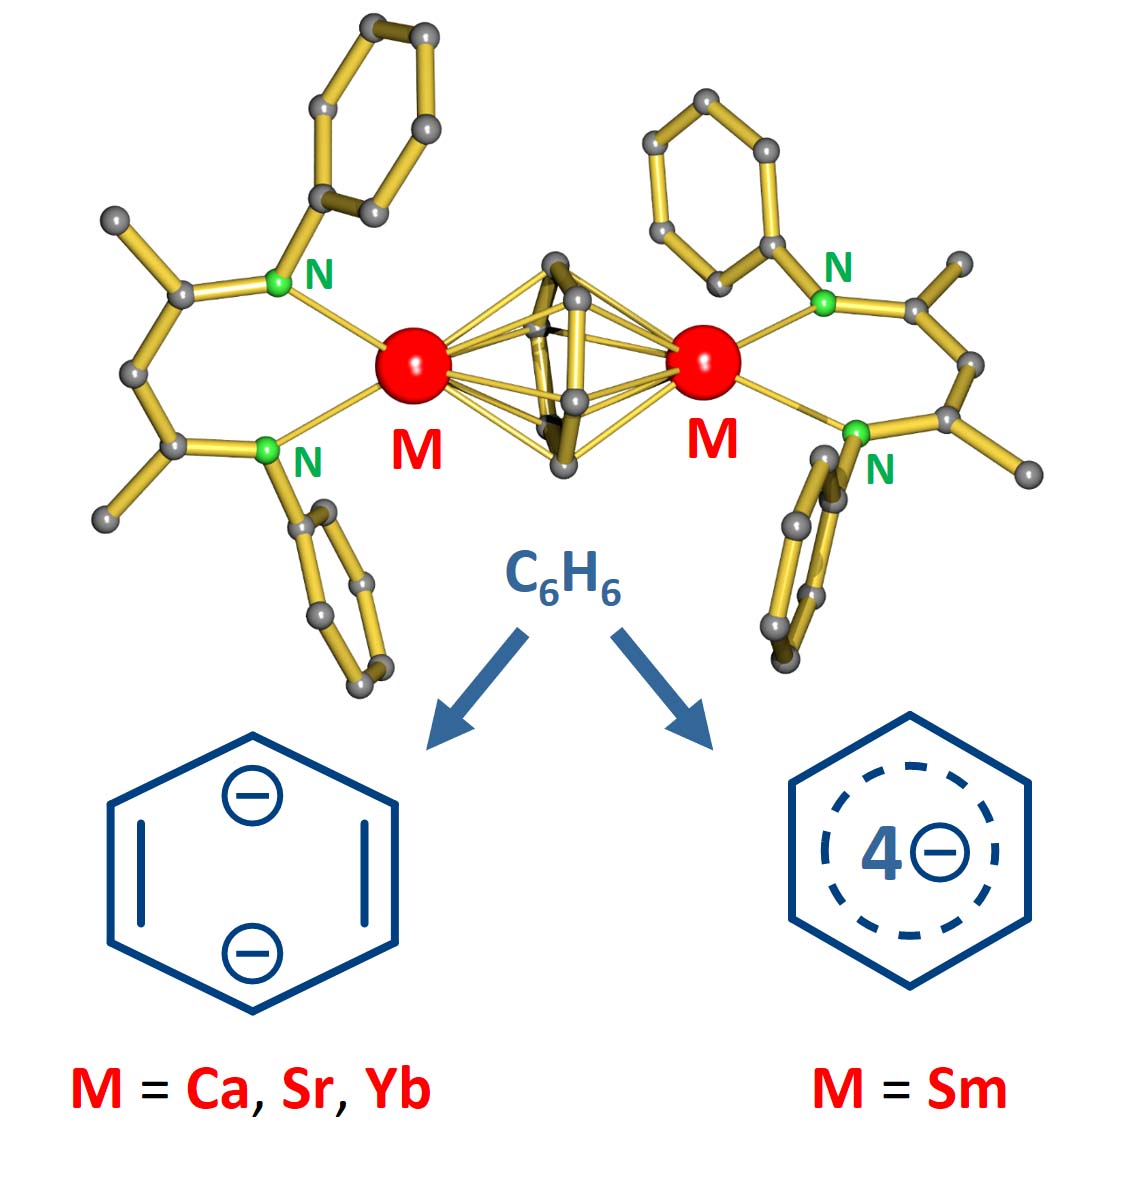 BENZENE(4-): Aromatic but not so stable - high charge & full antibonding orbitals! Most C6H6(4-) claims are highly controversial. We report proof for C6H6(4-) by comparing structures of Ca/Yb & Sr/Sm pairs that are normally perfectly matching @angew_chem shorturl.at/glrx1